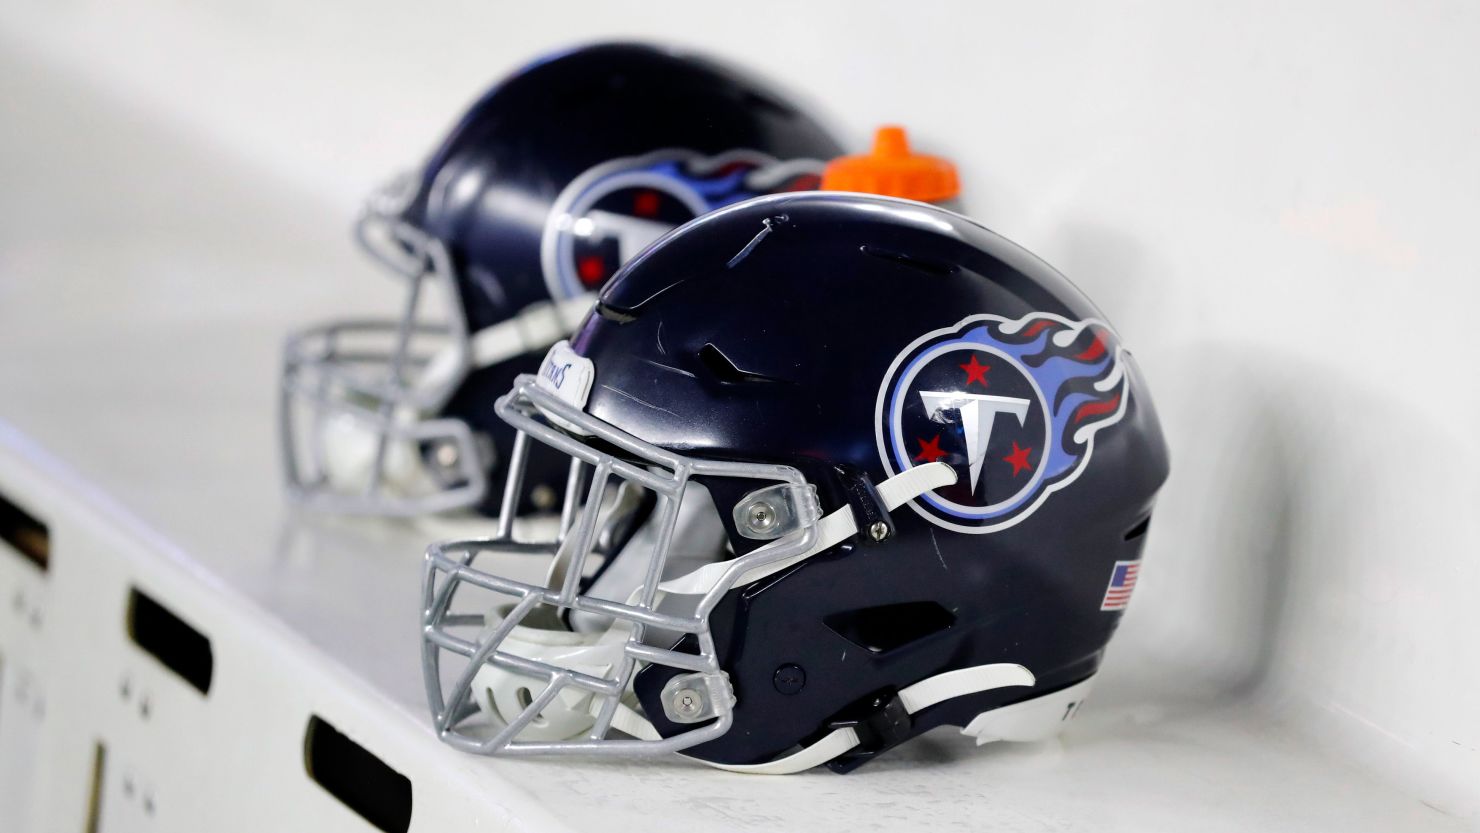 The NFL has reported no new positive Covid-19 tests for the Titans or Patriots on Monday.